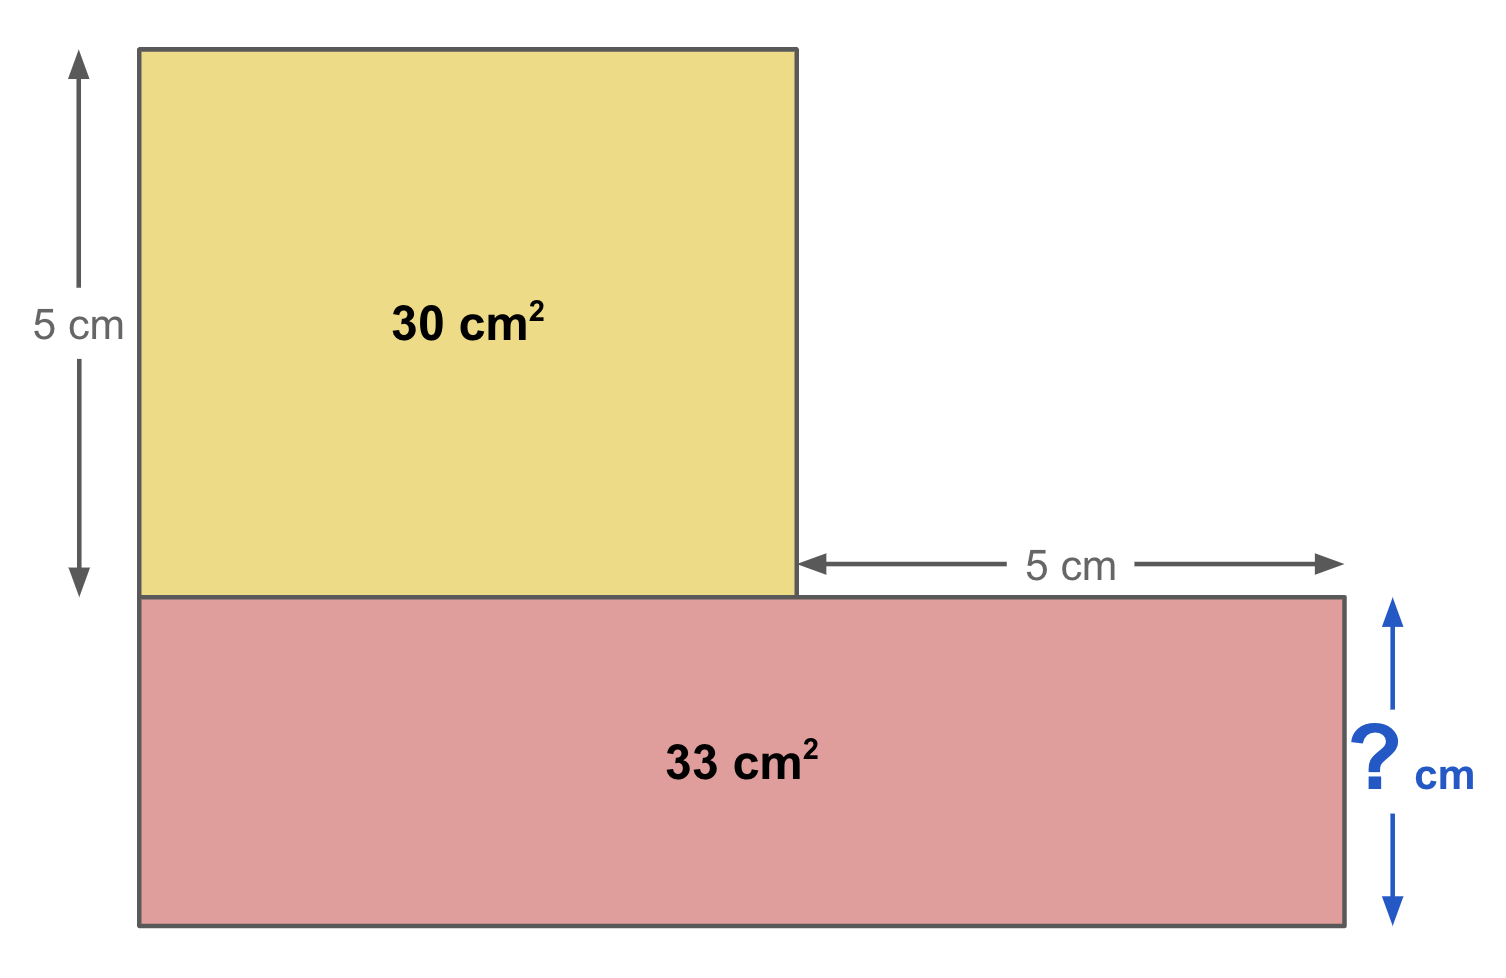 Two rectangles are connected to form a capital L shape. The yellow rectangle sits on top of the left side of the red rectangle, and has a labelled area of 30 square cm. Its left side is labelled with a length of 5 cm. The largest, red rectangle is on the bottom and has a labelled area of 33 square cm. Its top side that sticks out past the yellow rectangle is labelled as 5 cm long, and its right side has an unknown length, labelled with a question mark.